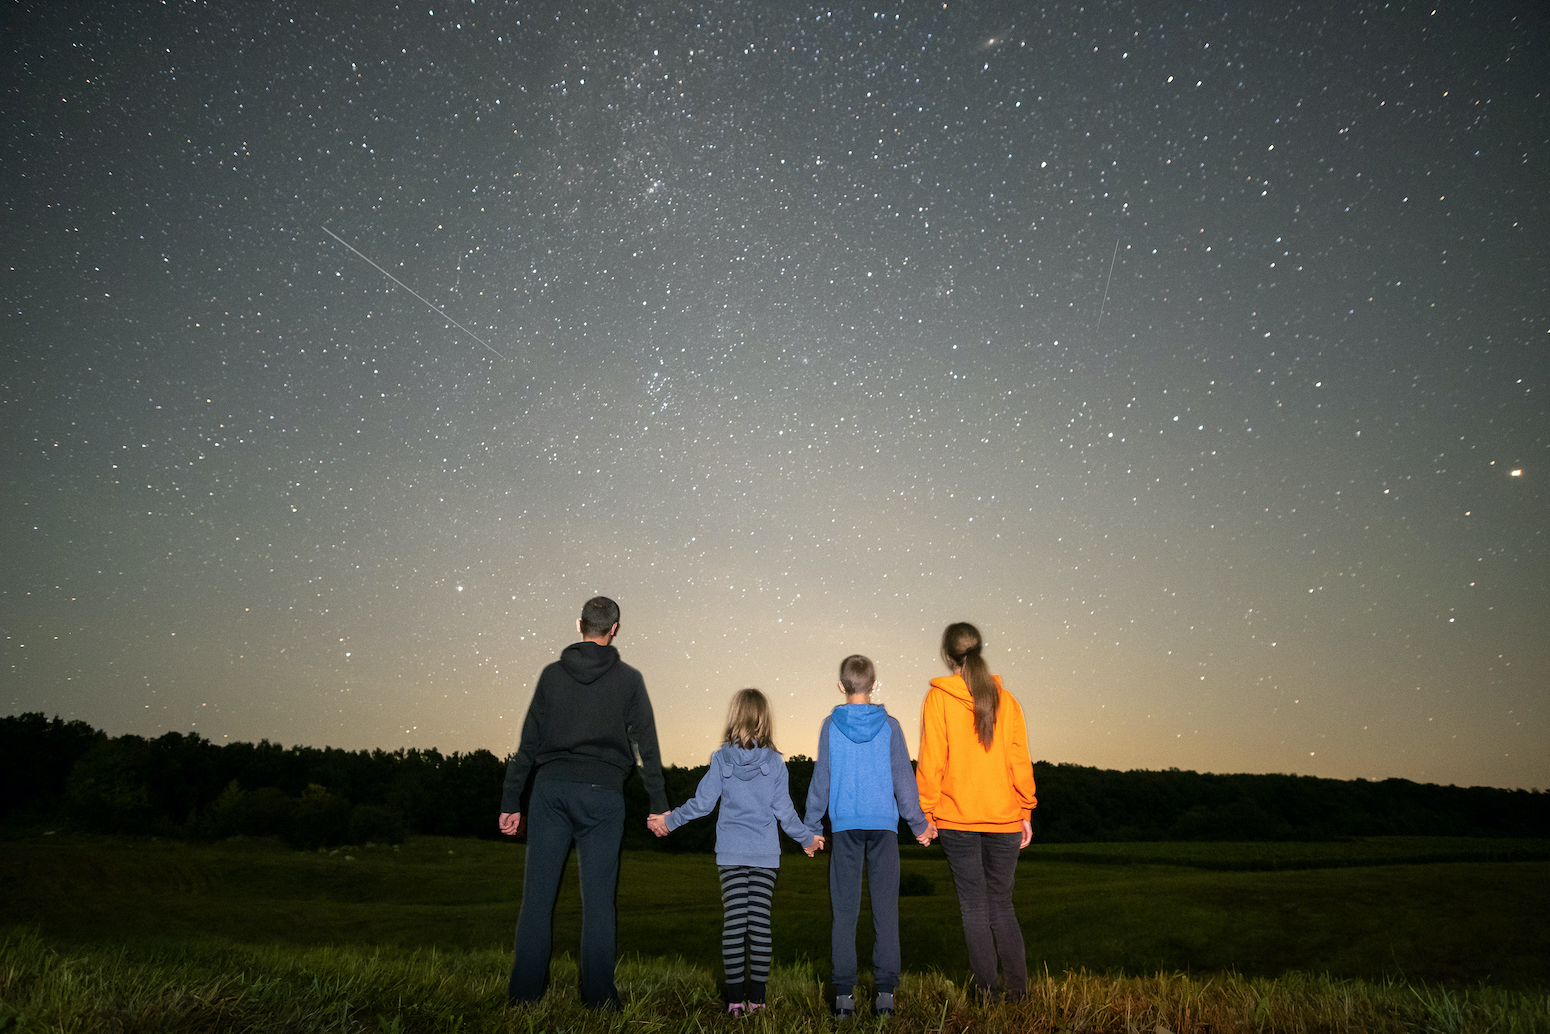 Parents and their kids standing in night field observing dark sky with many bright stars.